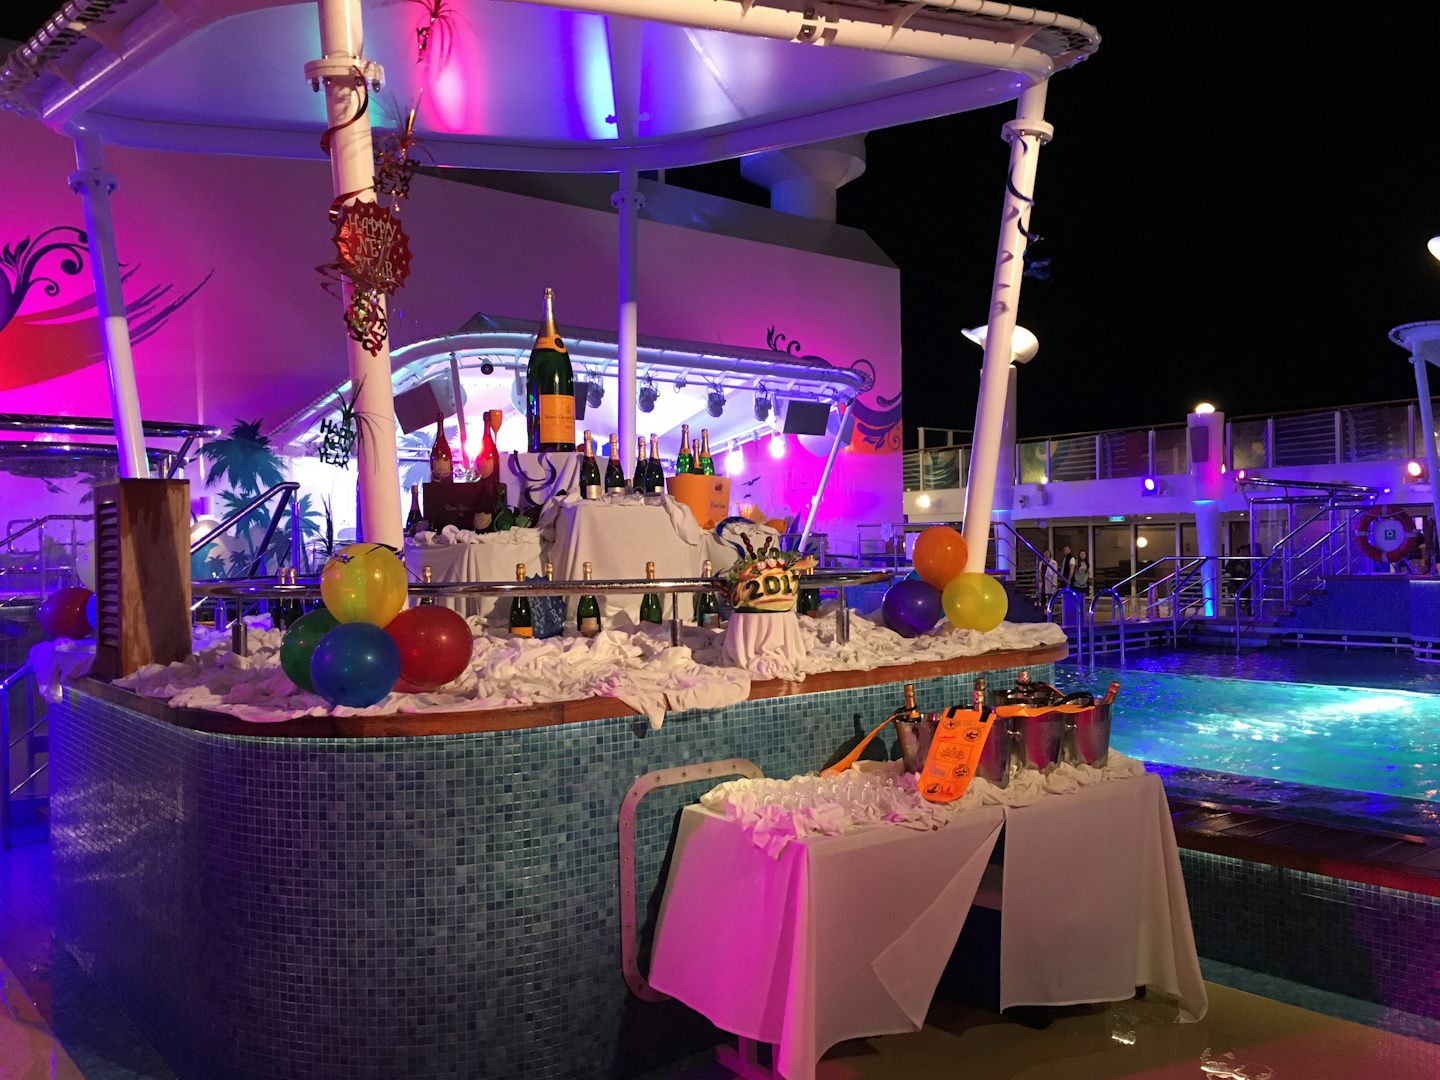 New Years Eve celebration on the ship with amazing live band and champagne.